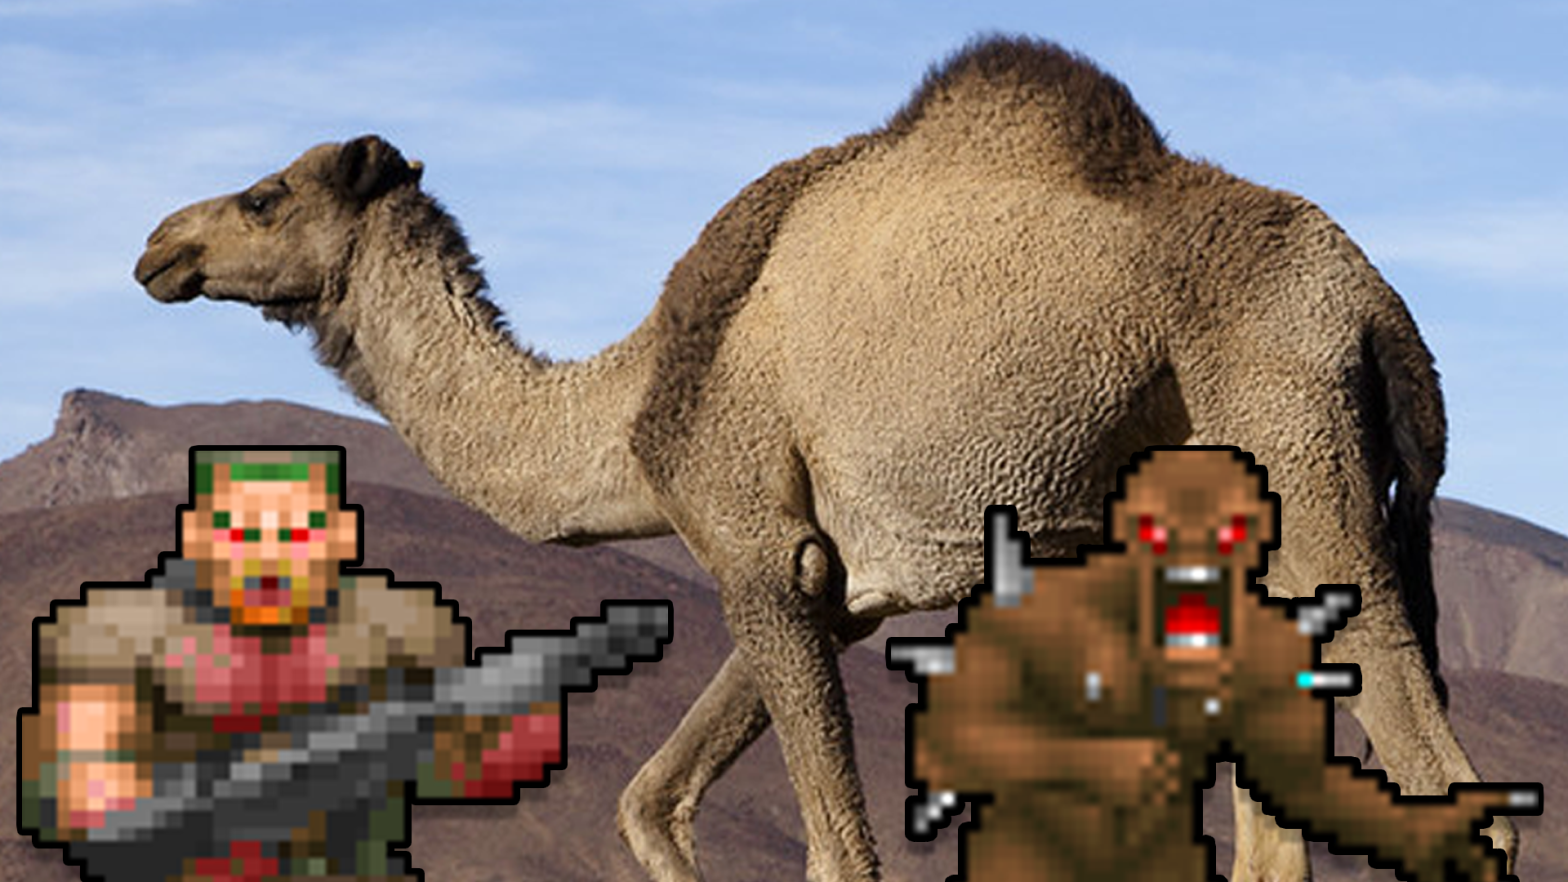 Camel in the desert by www.twin-loc.fr is licensed under CC BY 2.0 (Image: Twin-loc / id Software / Kotaku)